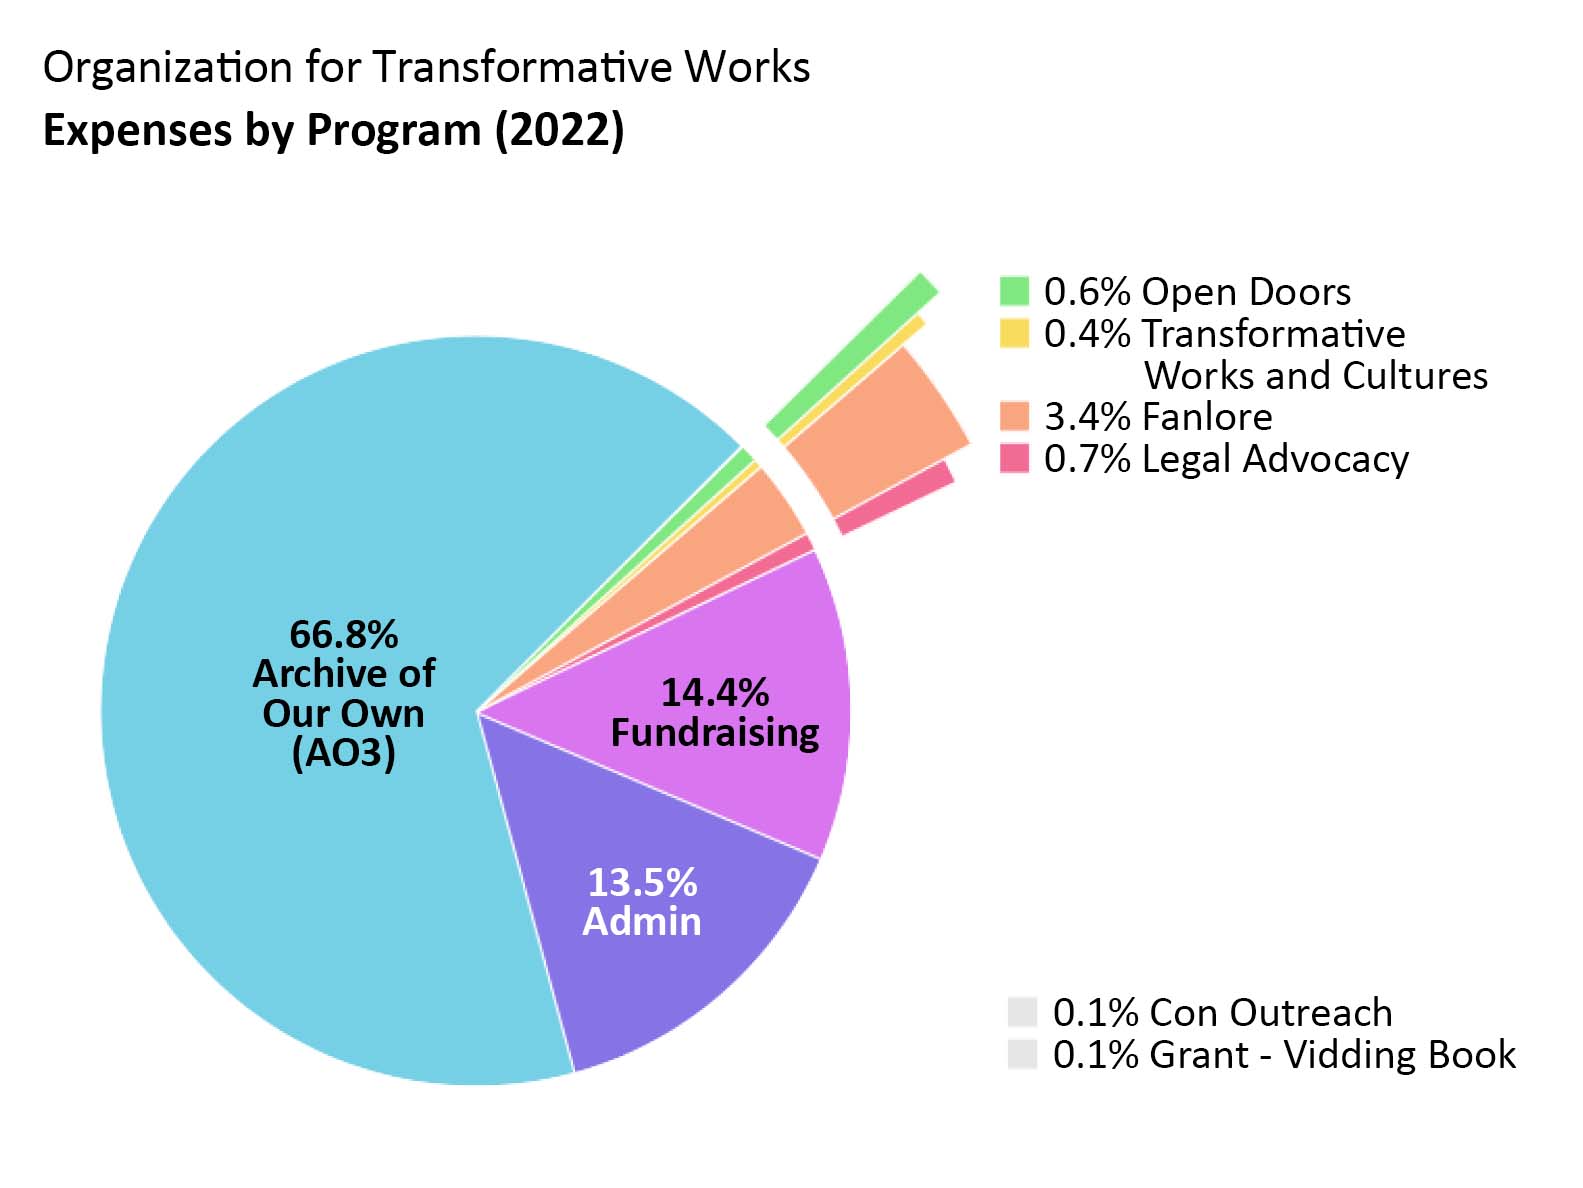 Expenses by program: Archive of Our Own: 66.7%. Open Doors: 0.6%. Transformative Works and Cultures: 0.4%. Fanlore: 3.4%. Legal Advocacy: 0.7%. Con Outreach: 0.1%. Grant - Vidding Book: 0.1%. Admin: 13.5%. Fundraising & Development: 14.4%.